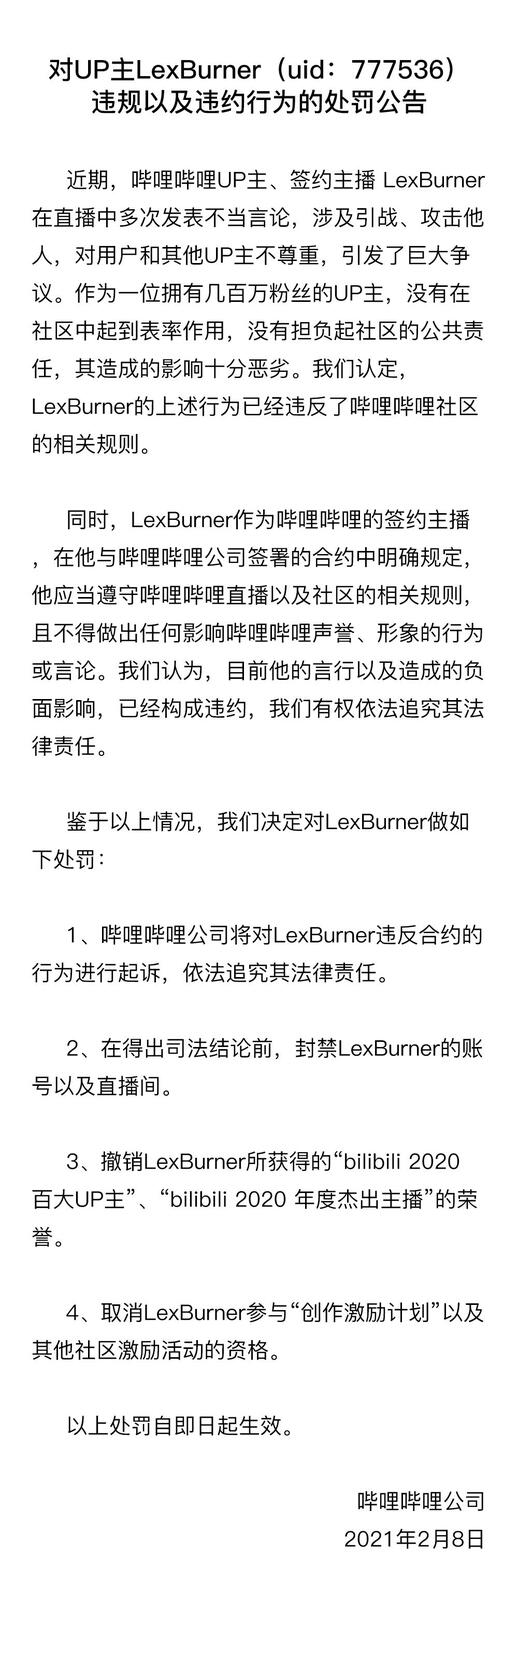 B station punishs Lex formally, seal the date that ban Zhang to investigate duty even not only, it is really difficult that this is answered